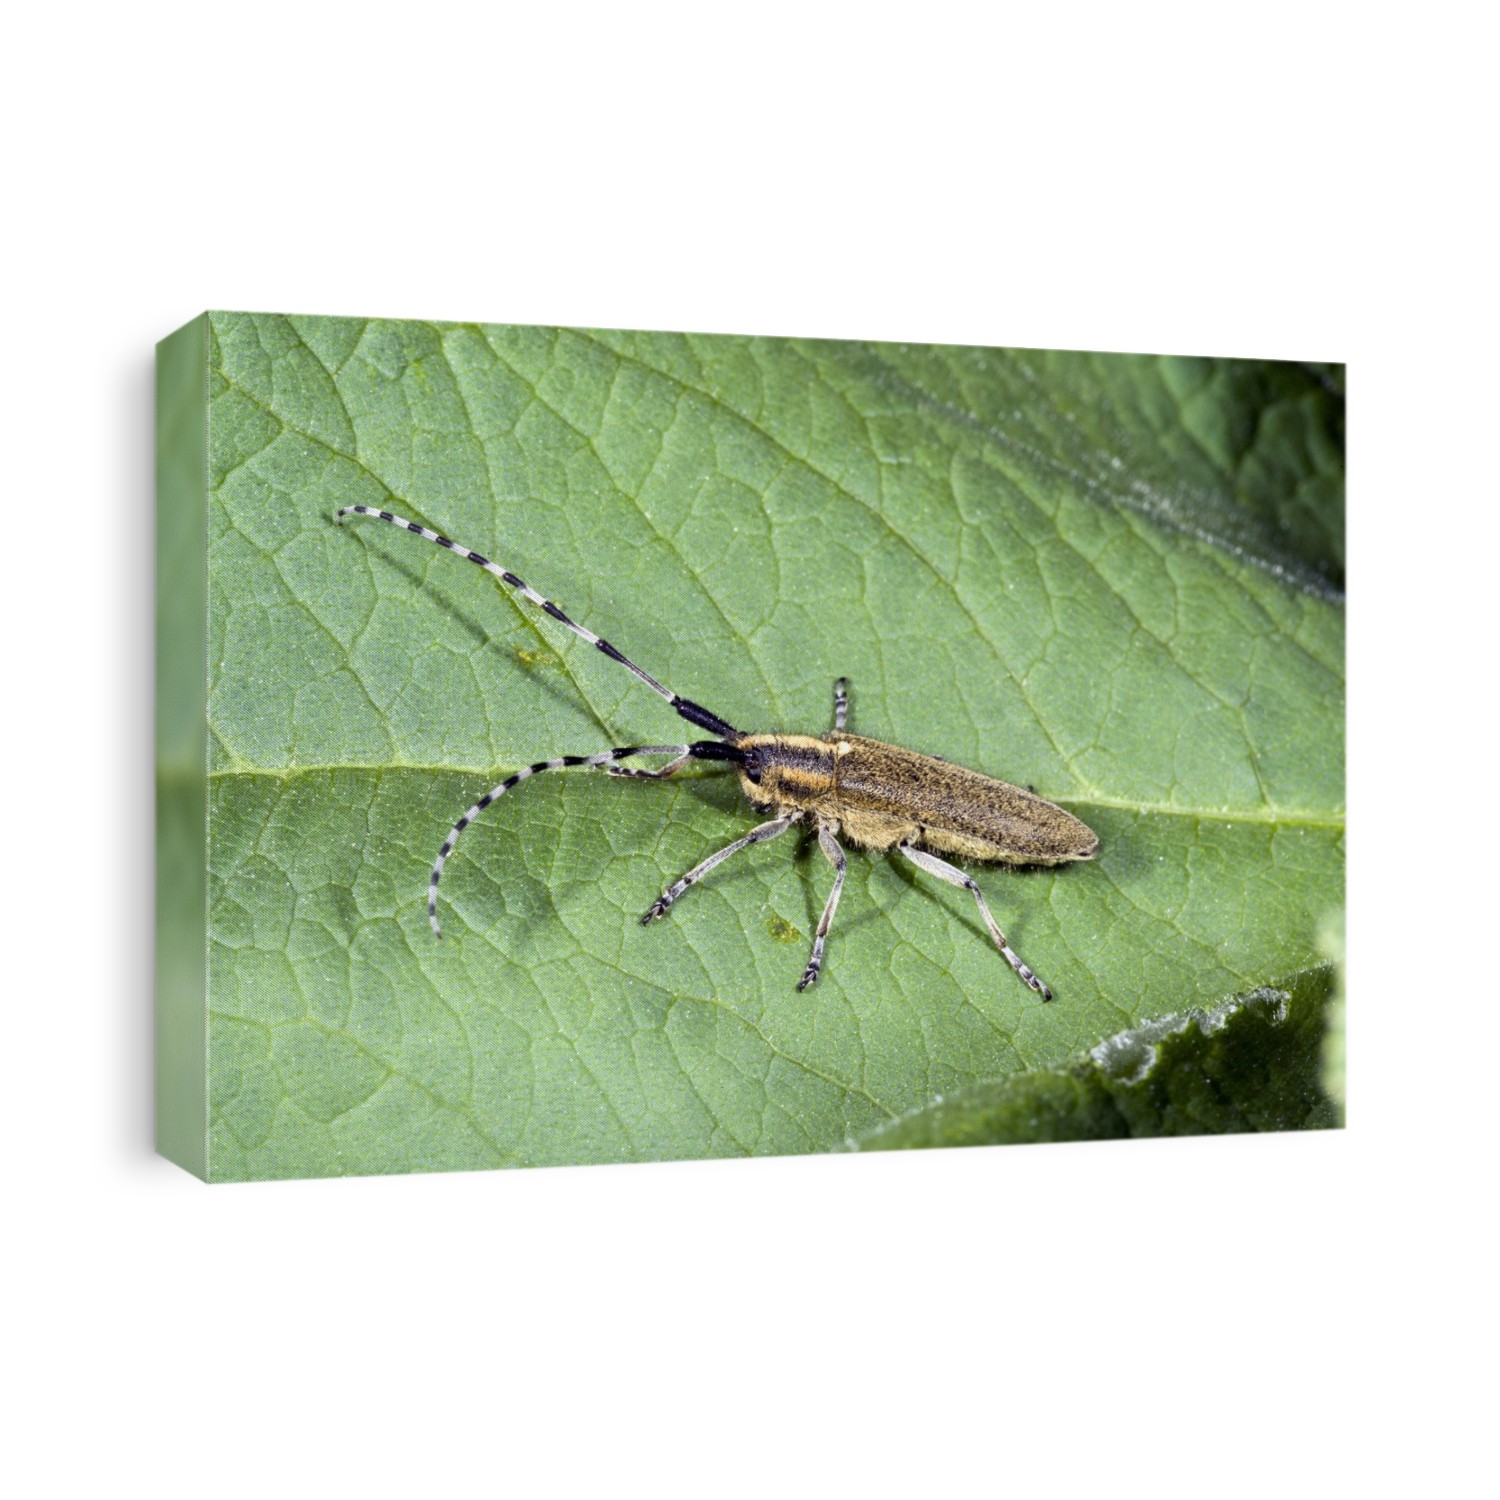 Golden-bloomed grey longhorn beetle (Agapanthia villosoviridescens) on a leaf. This beetle is found in the Caucasus, Europe, Kazakhstan, the Near East, Russia and Turkey. Photographed in the Pyrenees.